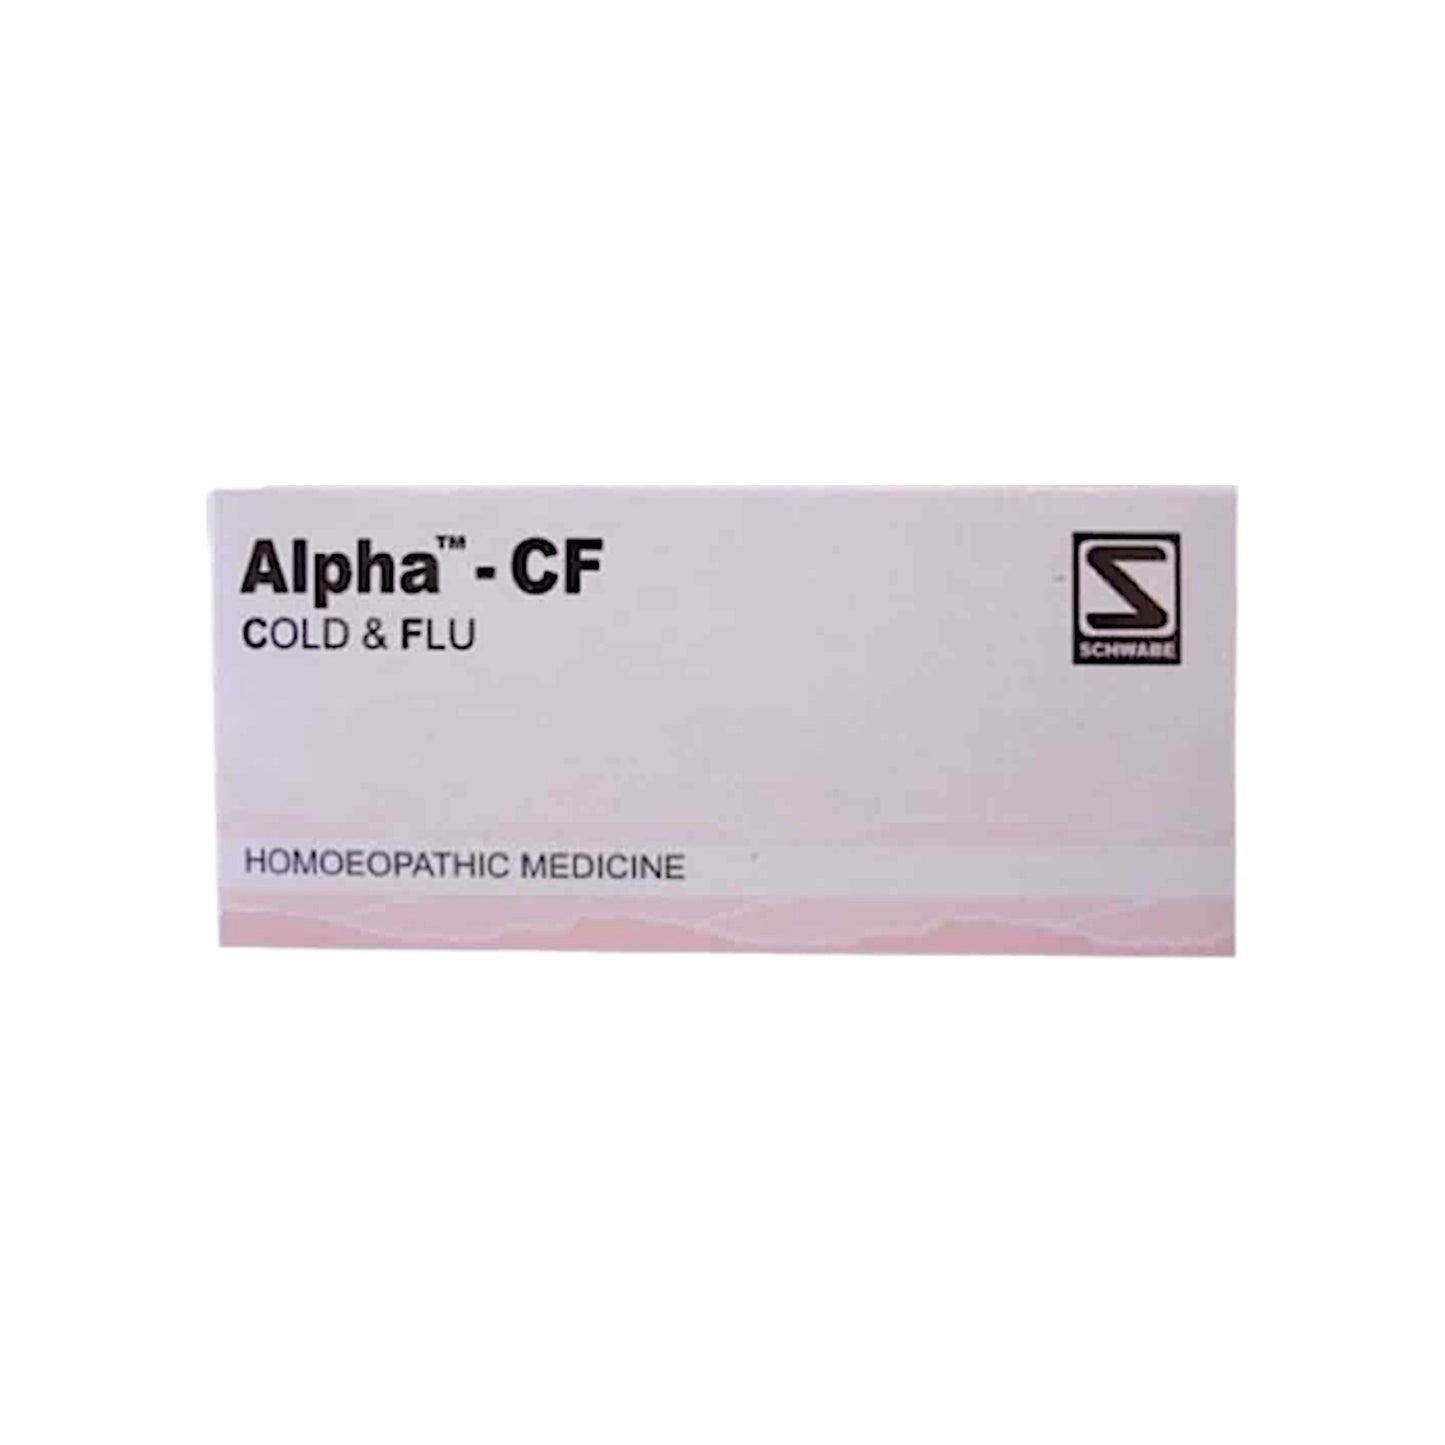 Dr. Schwabe Homeopathy - Alpha-CF 40 Tablets